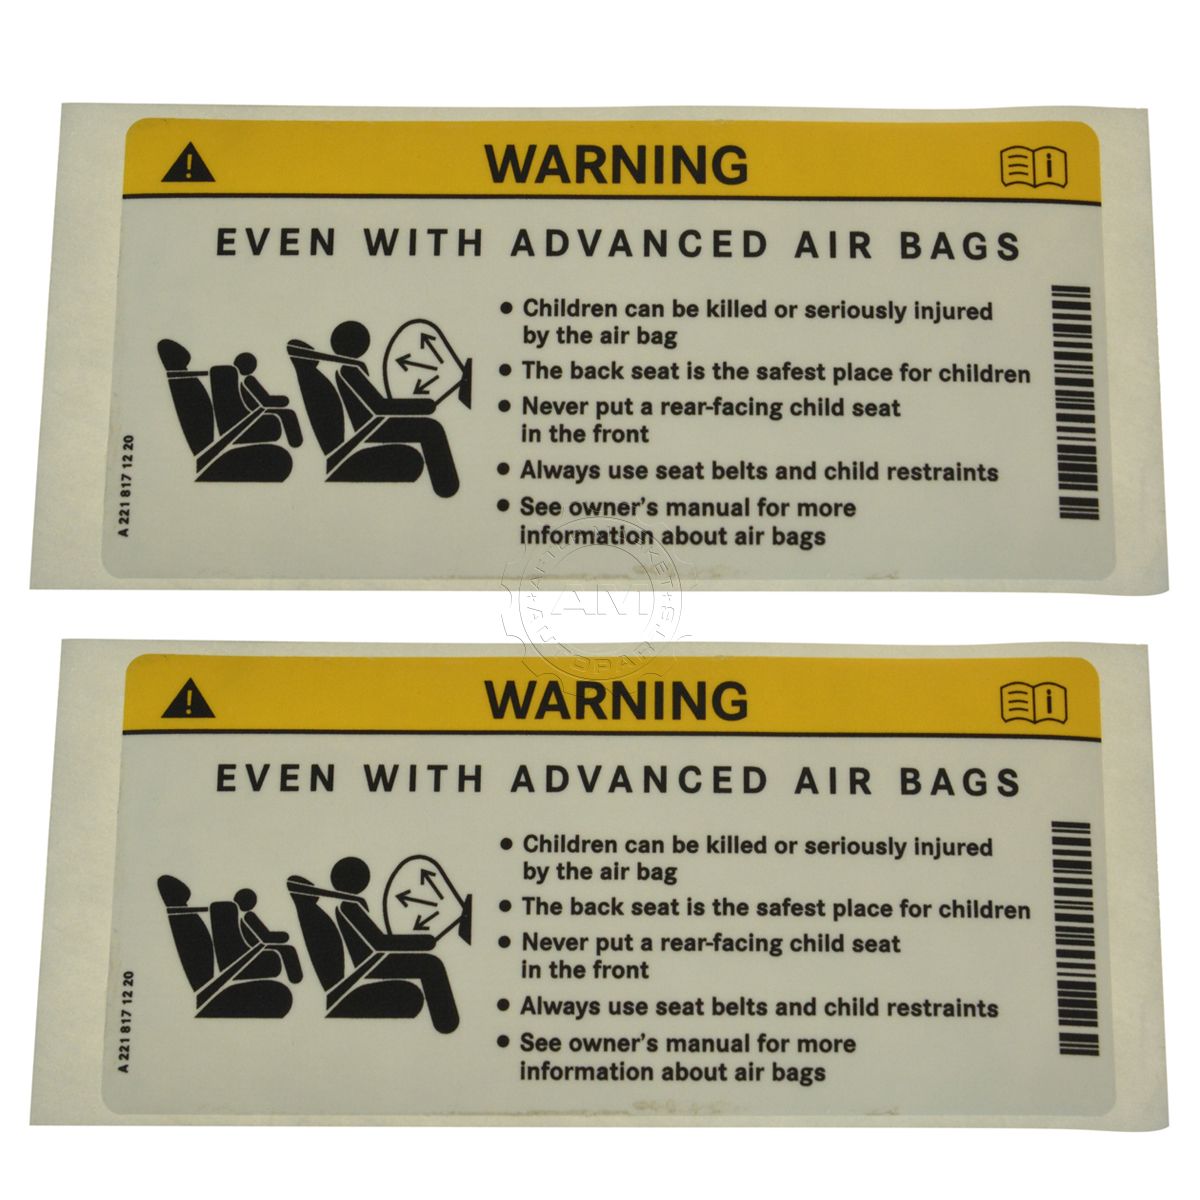 OEM 2218171220 Air Bag Warning Decal Sunvisor Mounted Pair for Mercedes Benz New